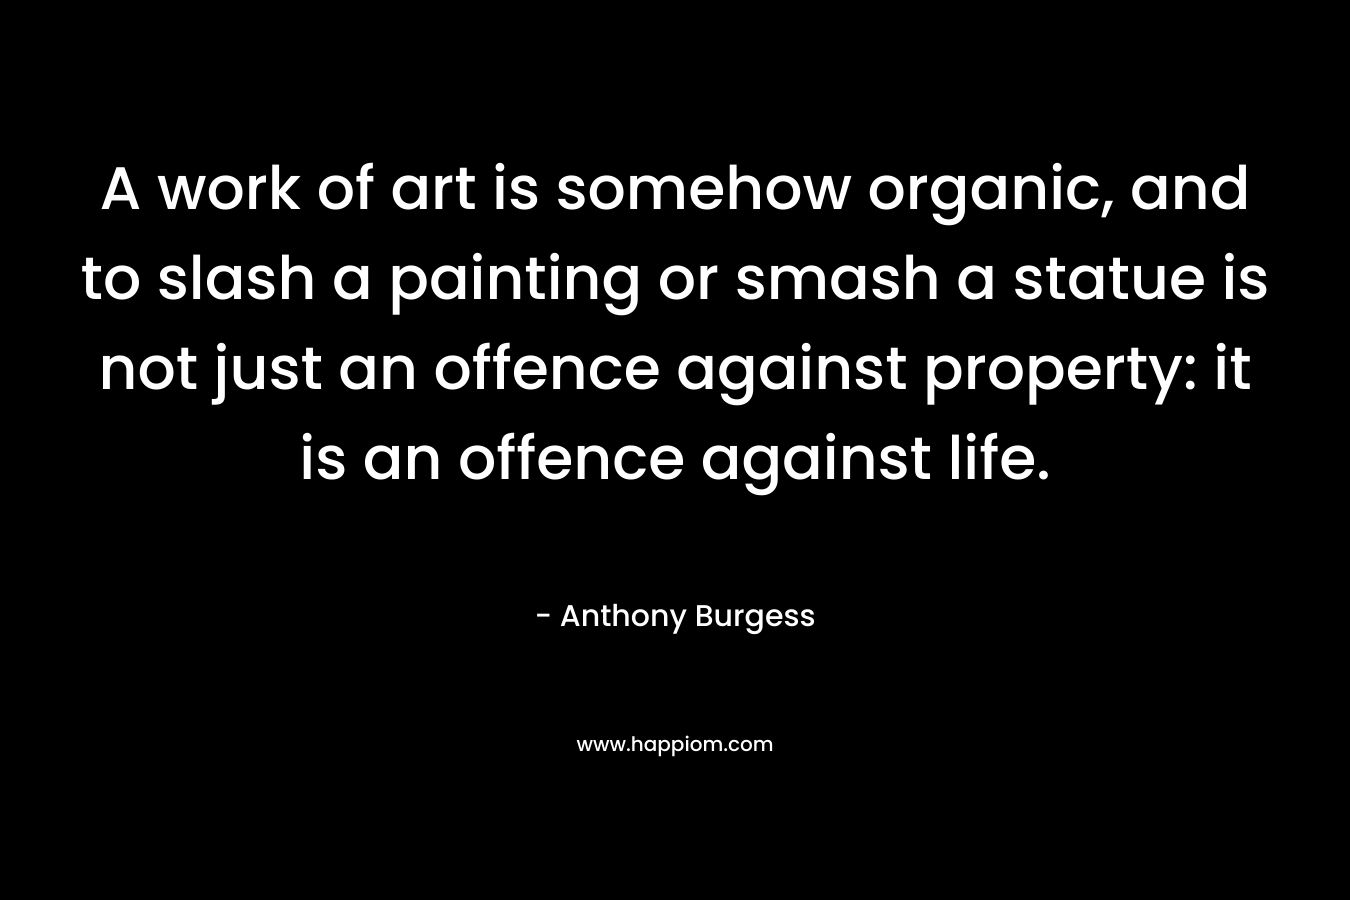 A work of art is somehow organic, and to slash a painting or smash a statue is not just an offence against property: it is an offence against life. – Anthony Burgess